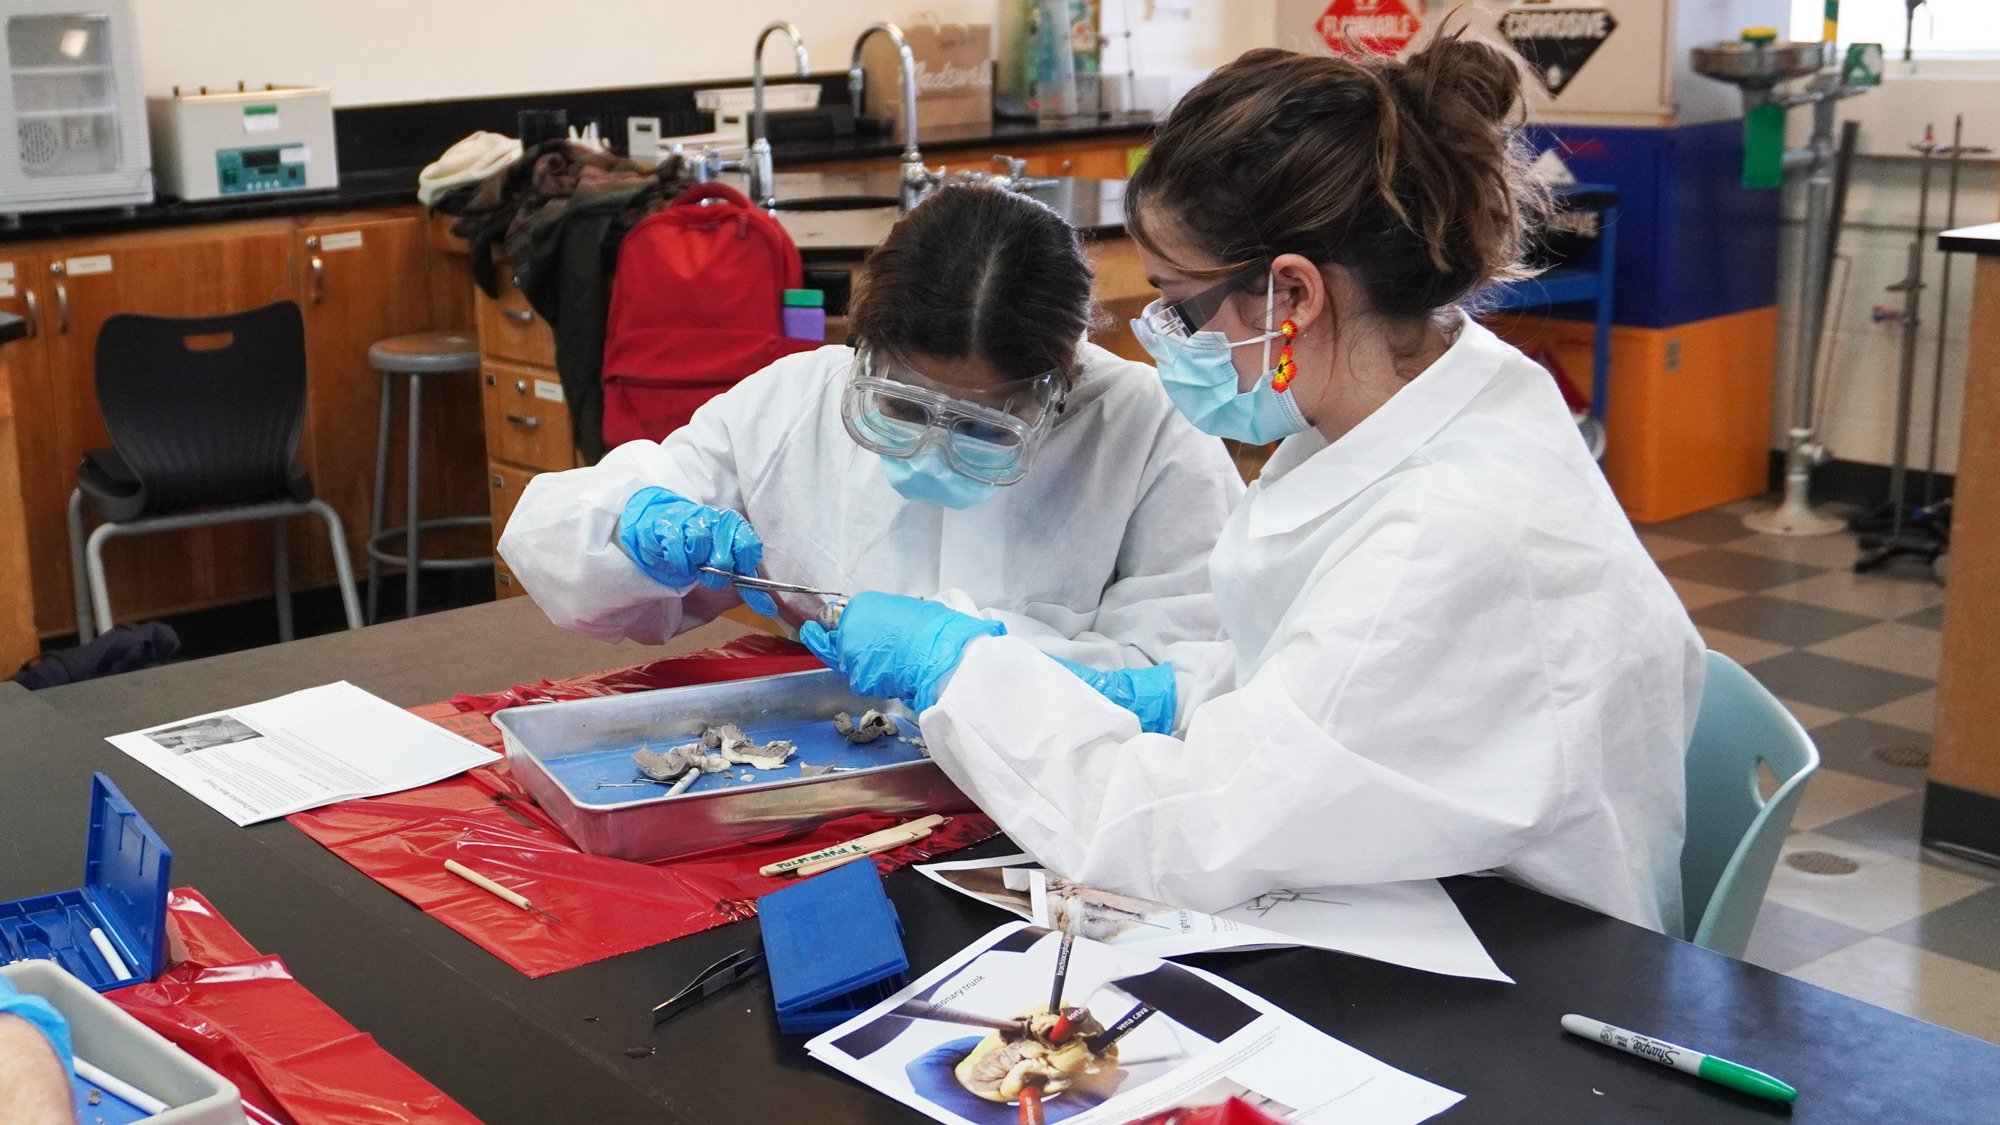 High School students dissecting a heart in biology.